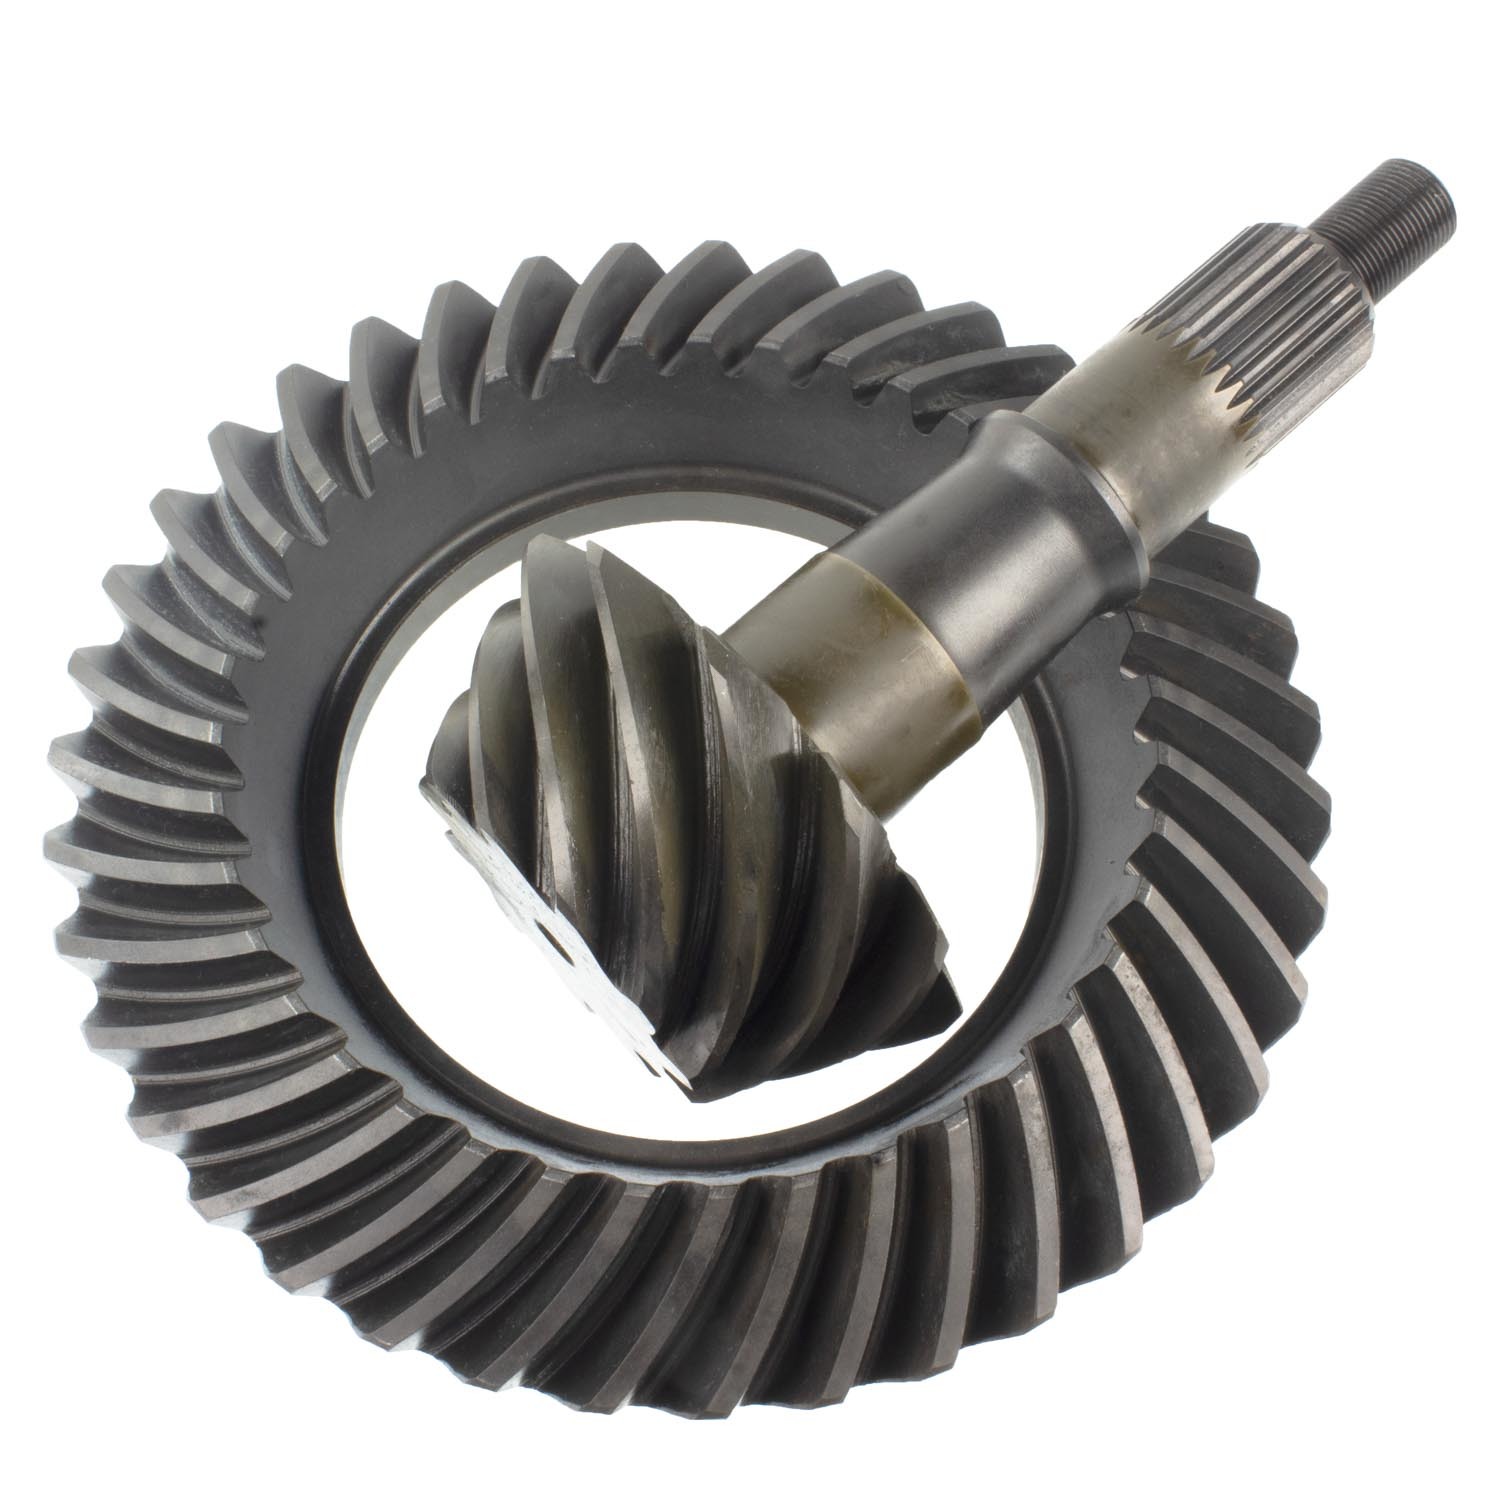 Richmond Gear F88355 - Ring and Pinion, Excel, 3.55 Ratio, 30 Spline Pinion, Ford 8.8 in, Kit